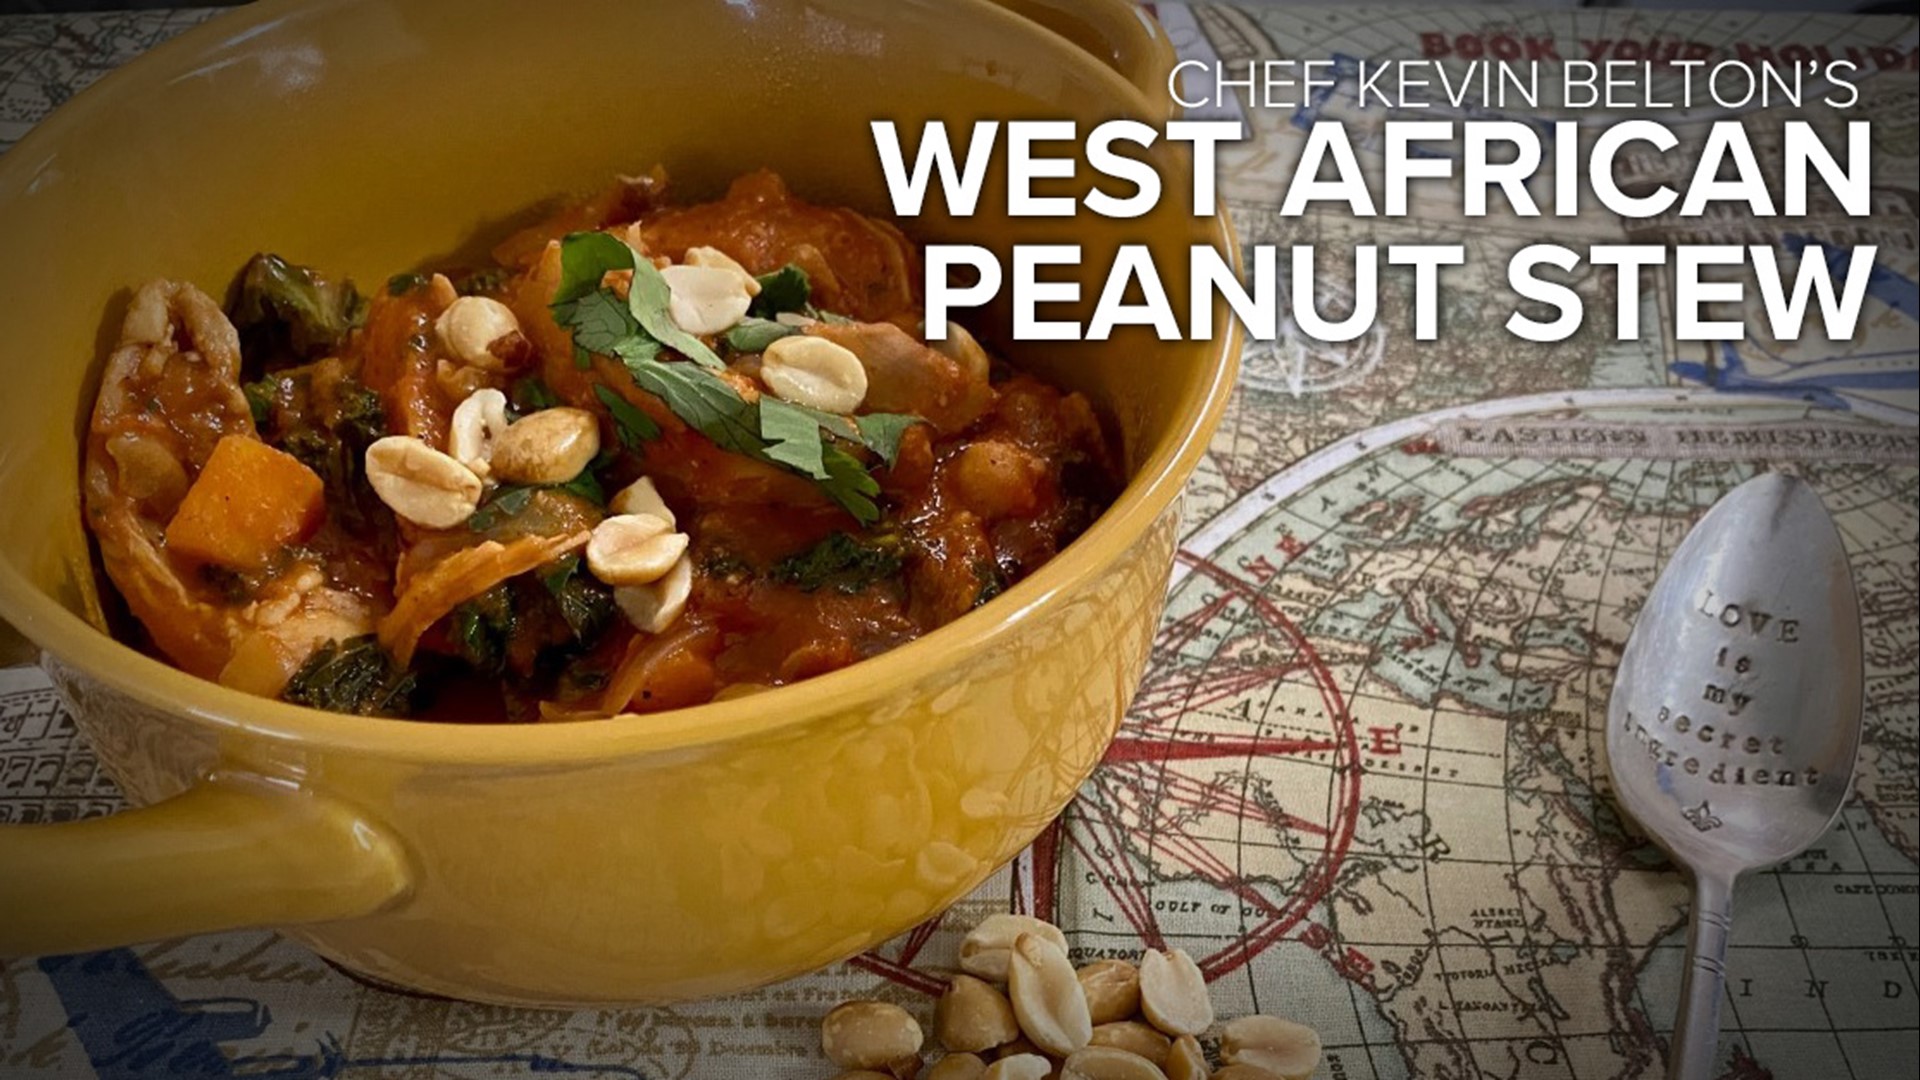 You may not know it, but it's National Peanut Month! I wanted to do something a little different today, so let's make West African Peanut Stew.